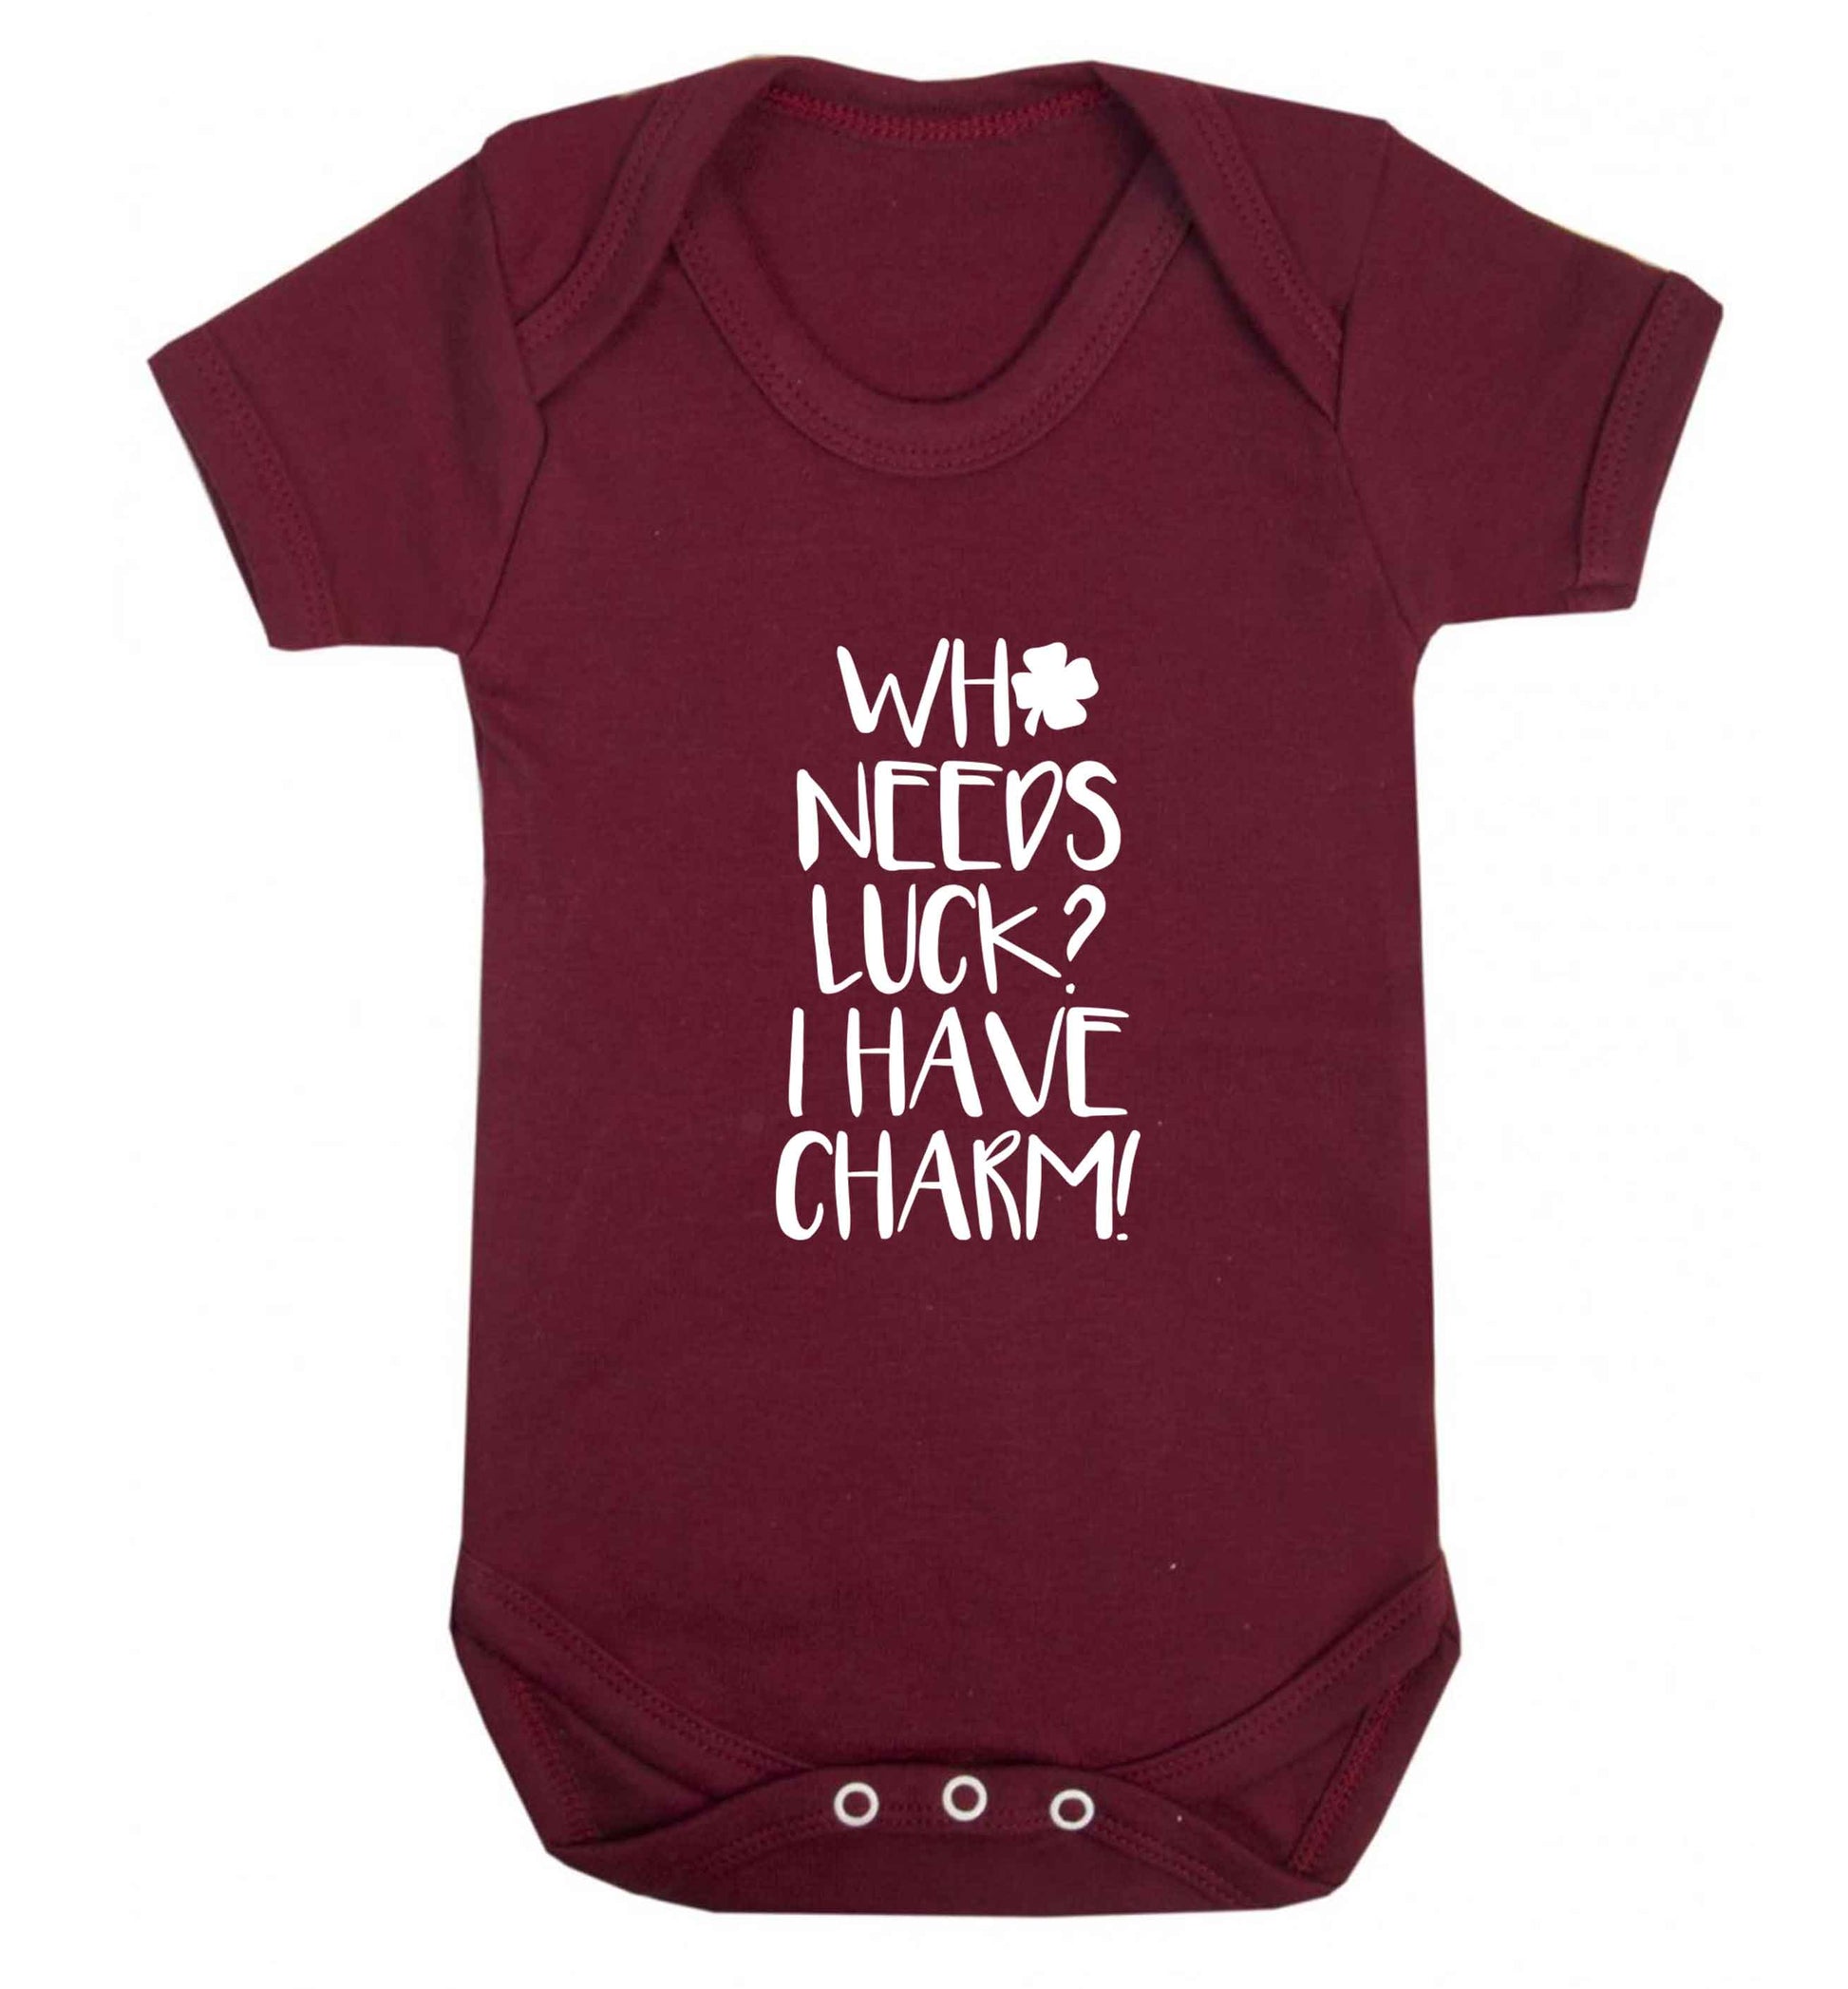 Who needs luck? I have charm! baby vest maroon 18-24 months